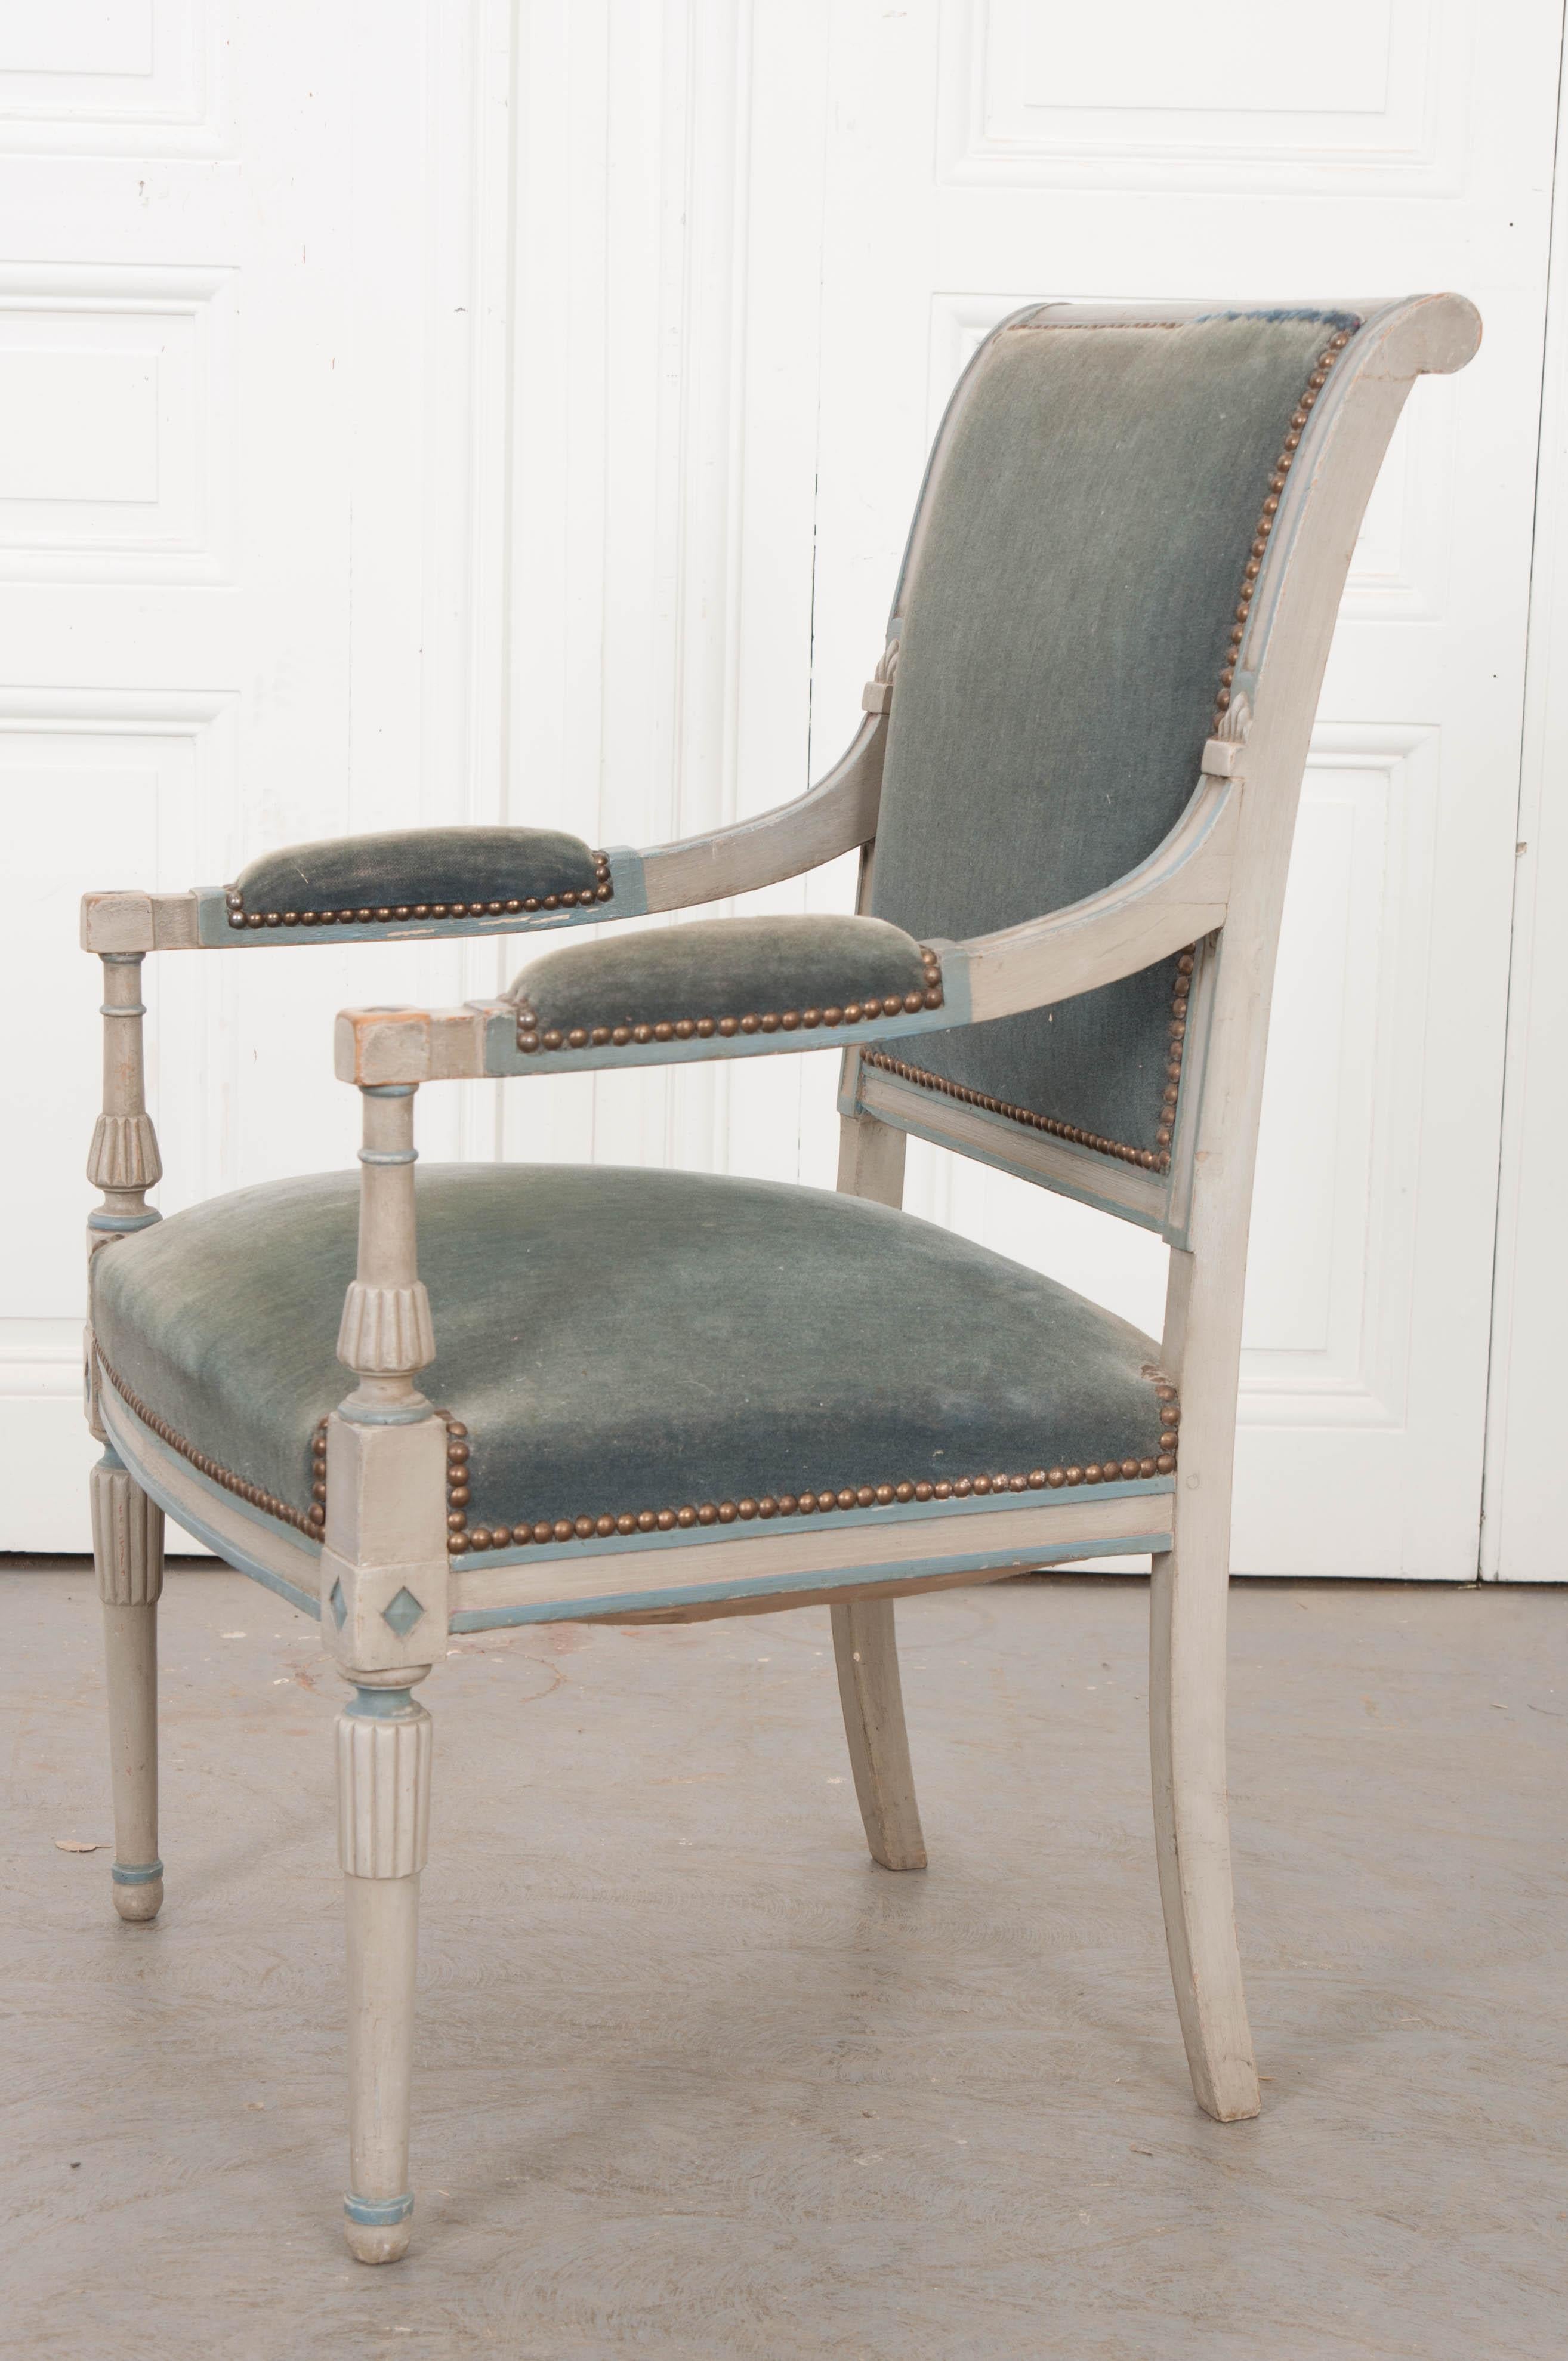 This delightful Second Empire carved and painted fauteuil, circa 1870 is from France. The frame is painted grey with pale French-blue highlights and retains the original slate-blue velvet upholstery. This armchair would make a great fauteuil de